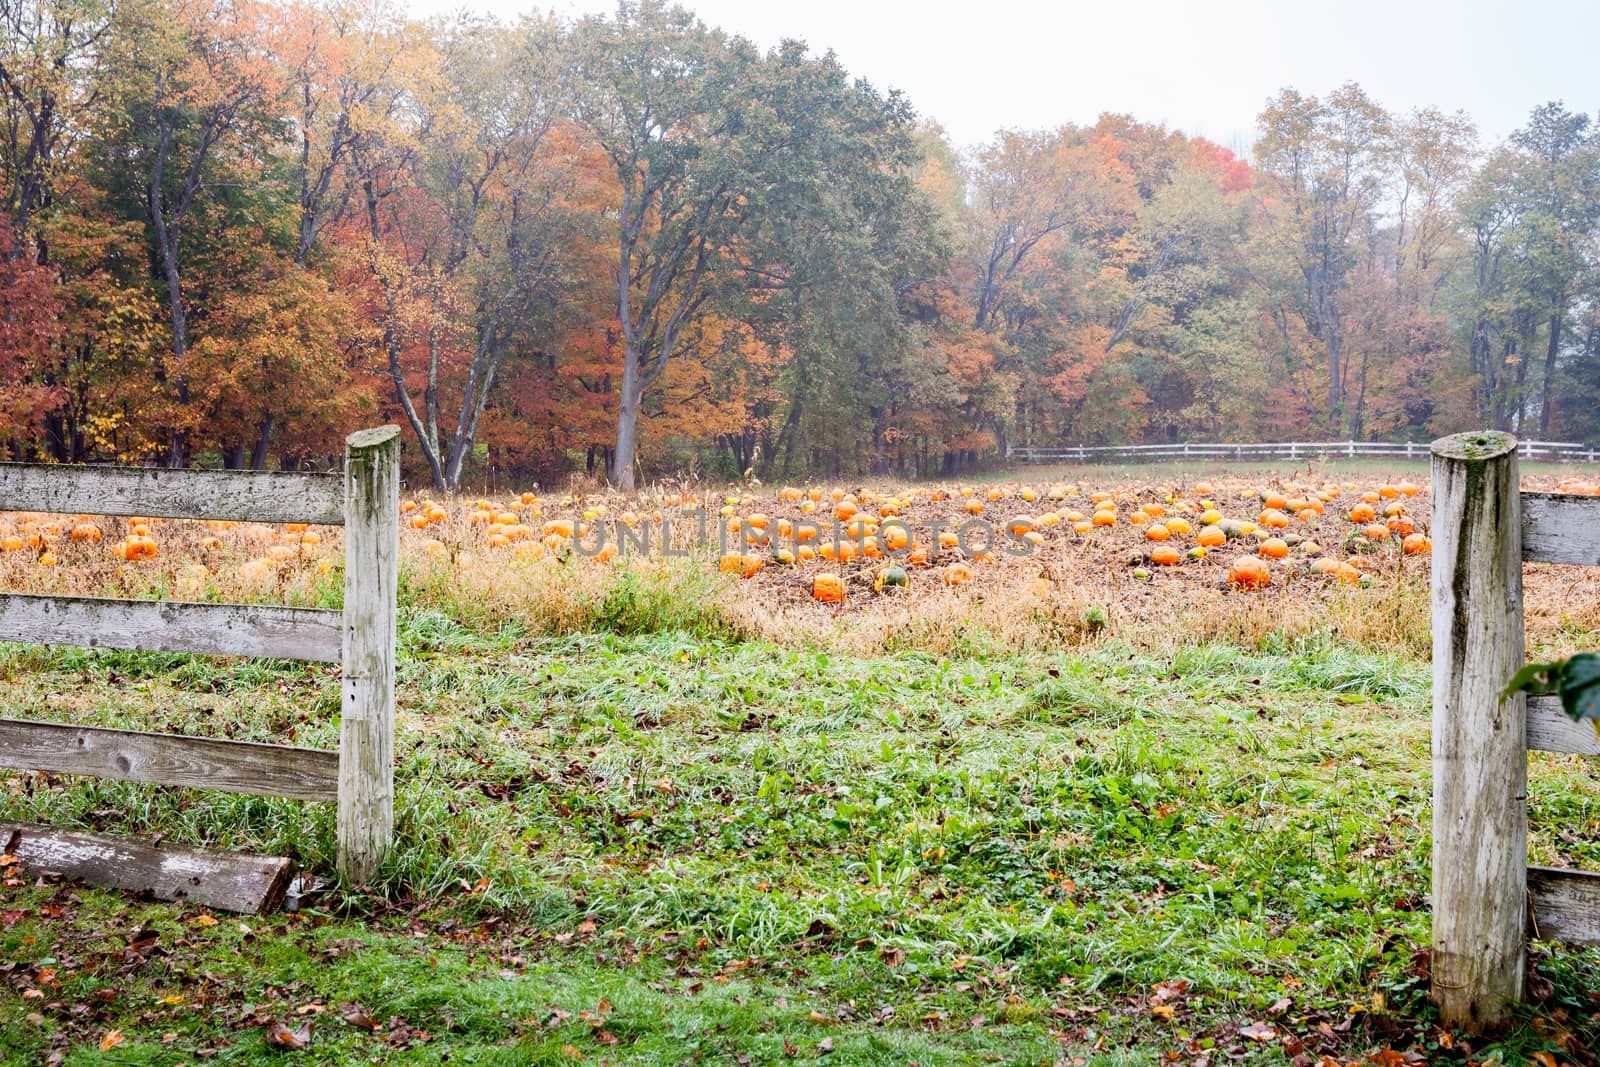 Field of ready to pick pumkins through wooden fence on misty dam by brians101